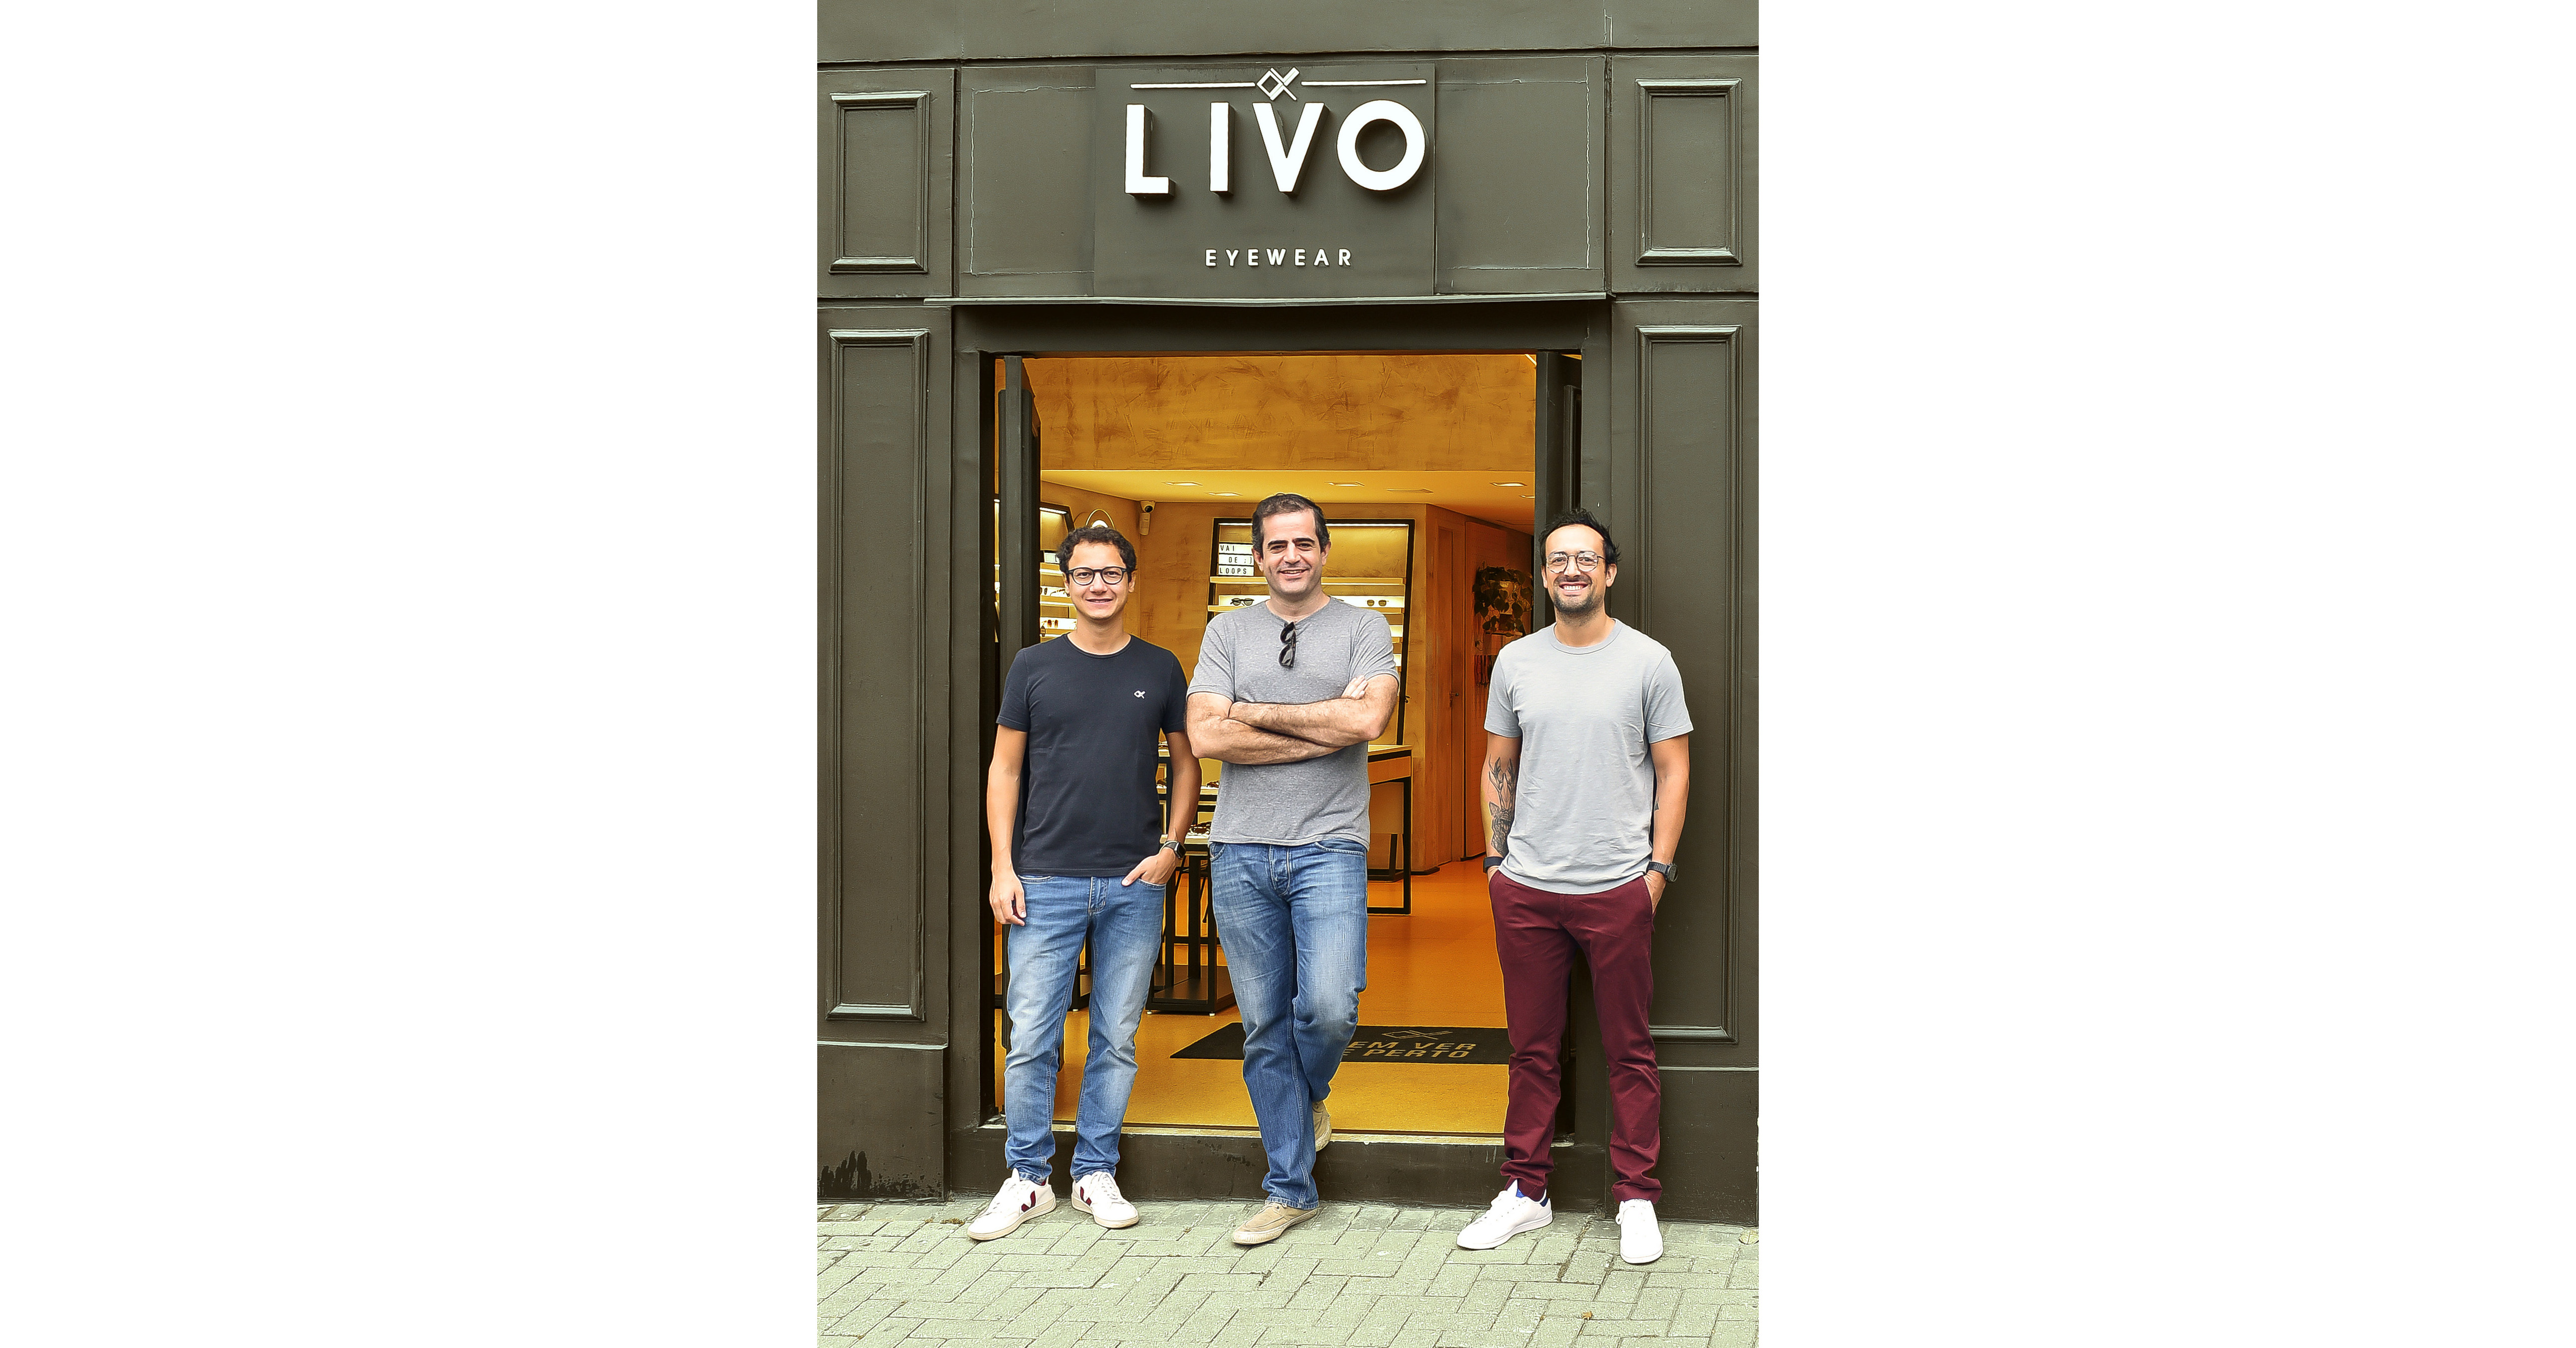 Lentesplus accelerates its expansion to glasses omnichannel strategy through the acquisition of LIVO, backed by a Brazil category leader